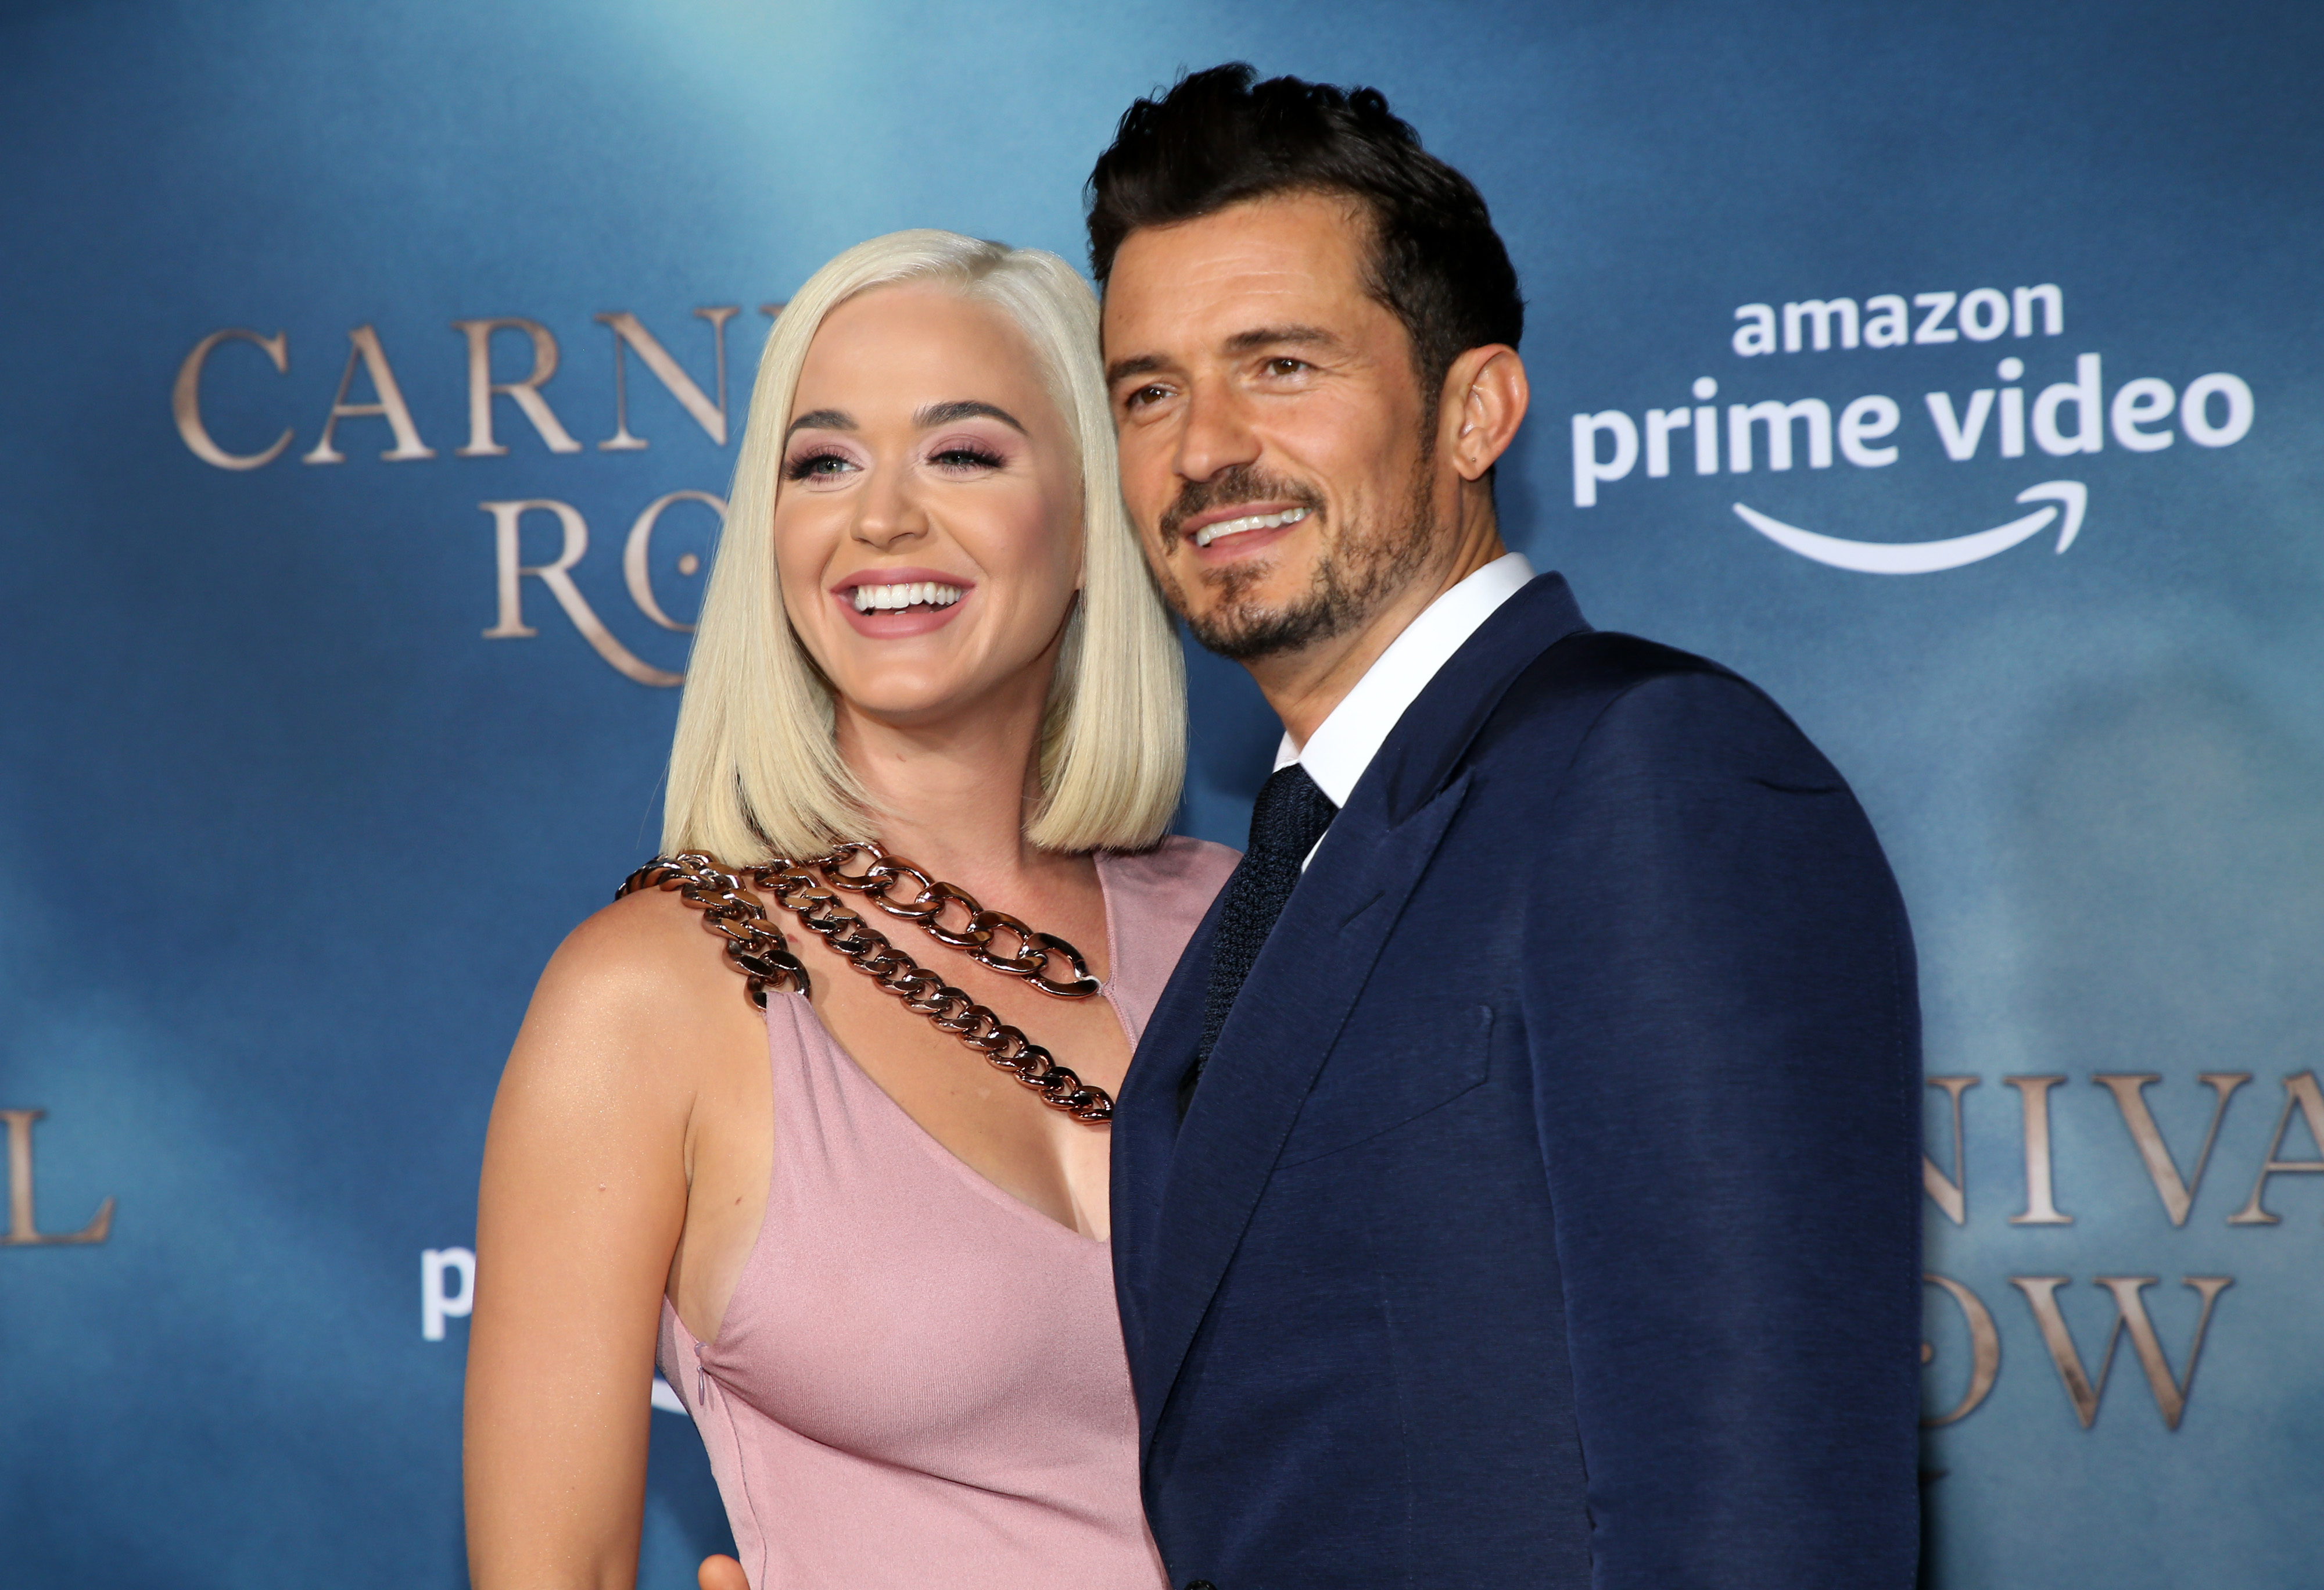 Katy Perry and Orlando Bloom attend the LA premiere of Amazon's "Carnival Row" at TCL Chinese Theatre on August 21, 2019 in Hollywood, California | Source: Getty Images